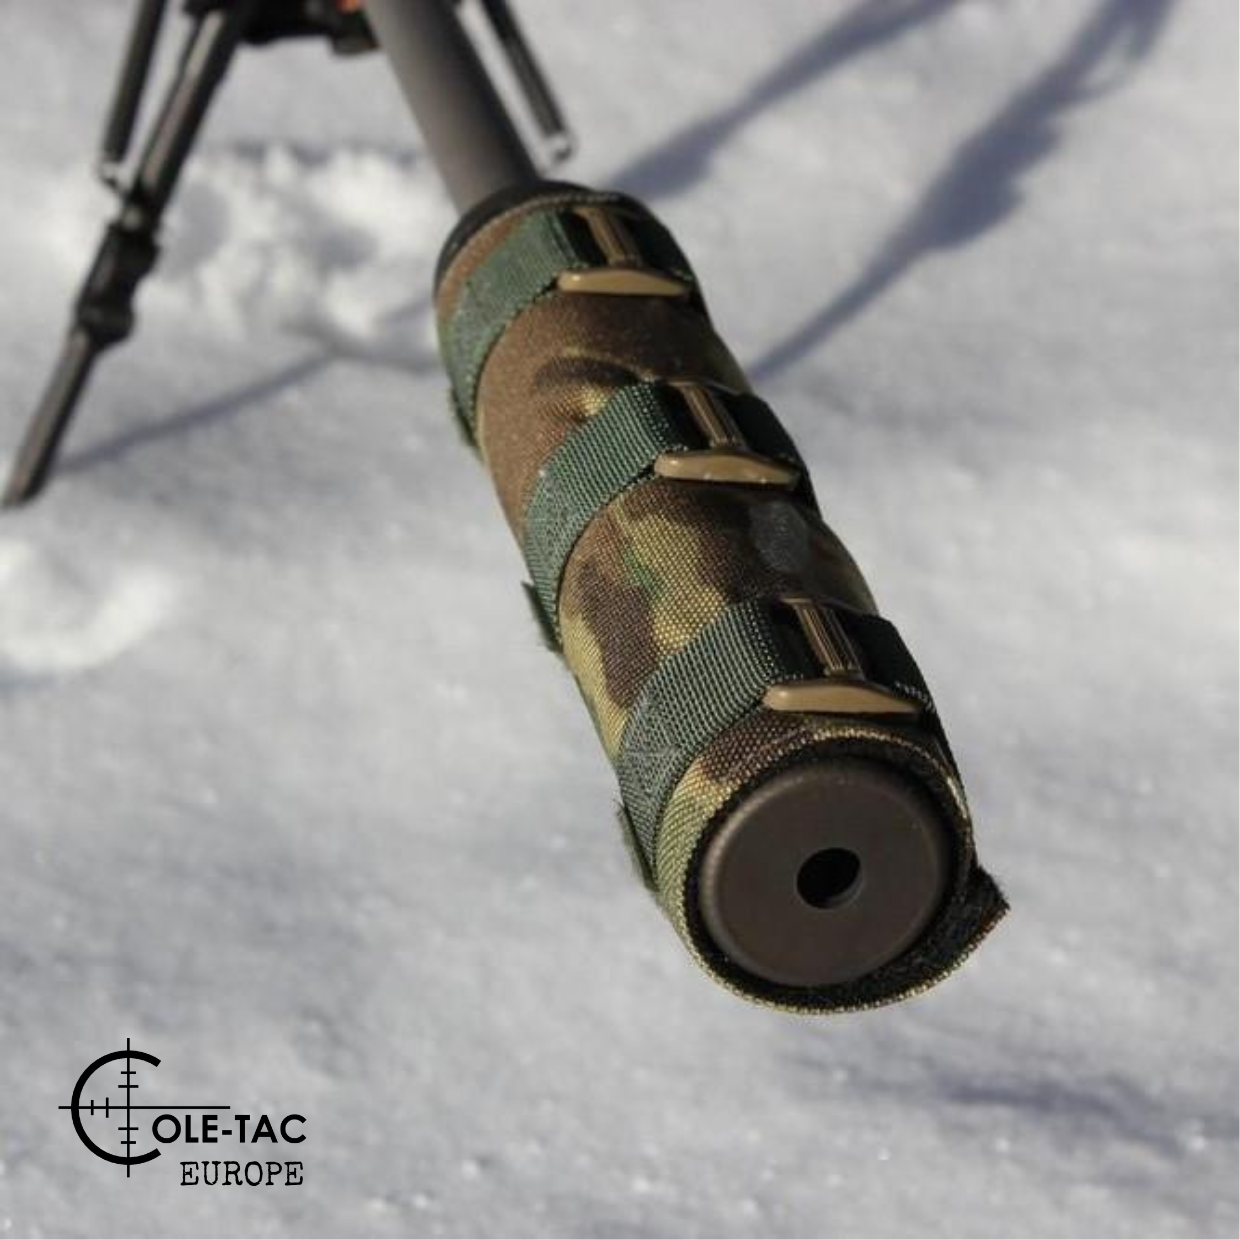 High Quality Custom Suppressor Covers  Unique Shooting Accessories -  Cole-TAC Europe